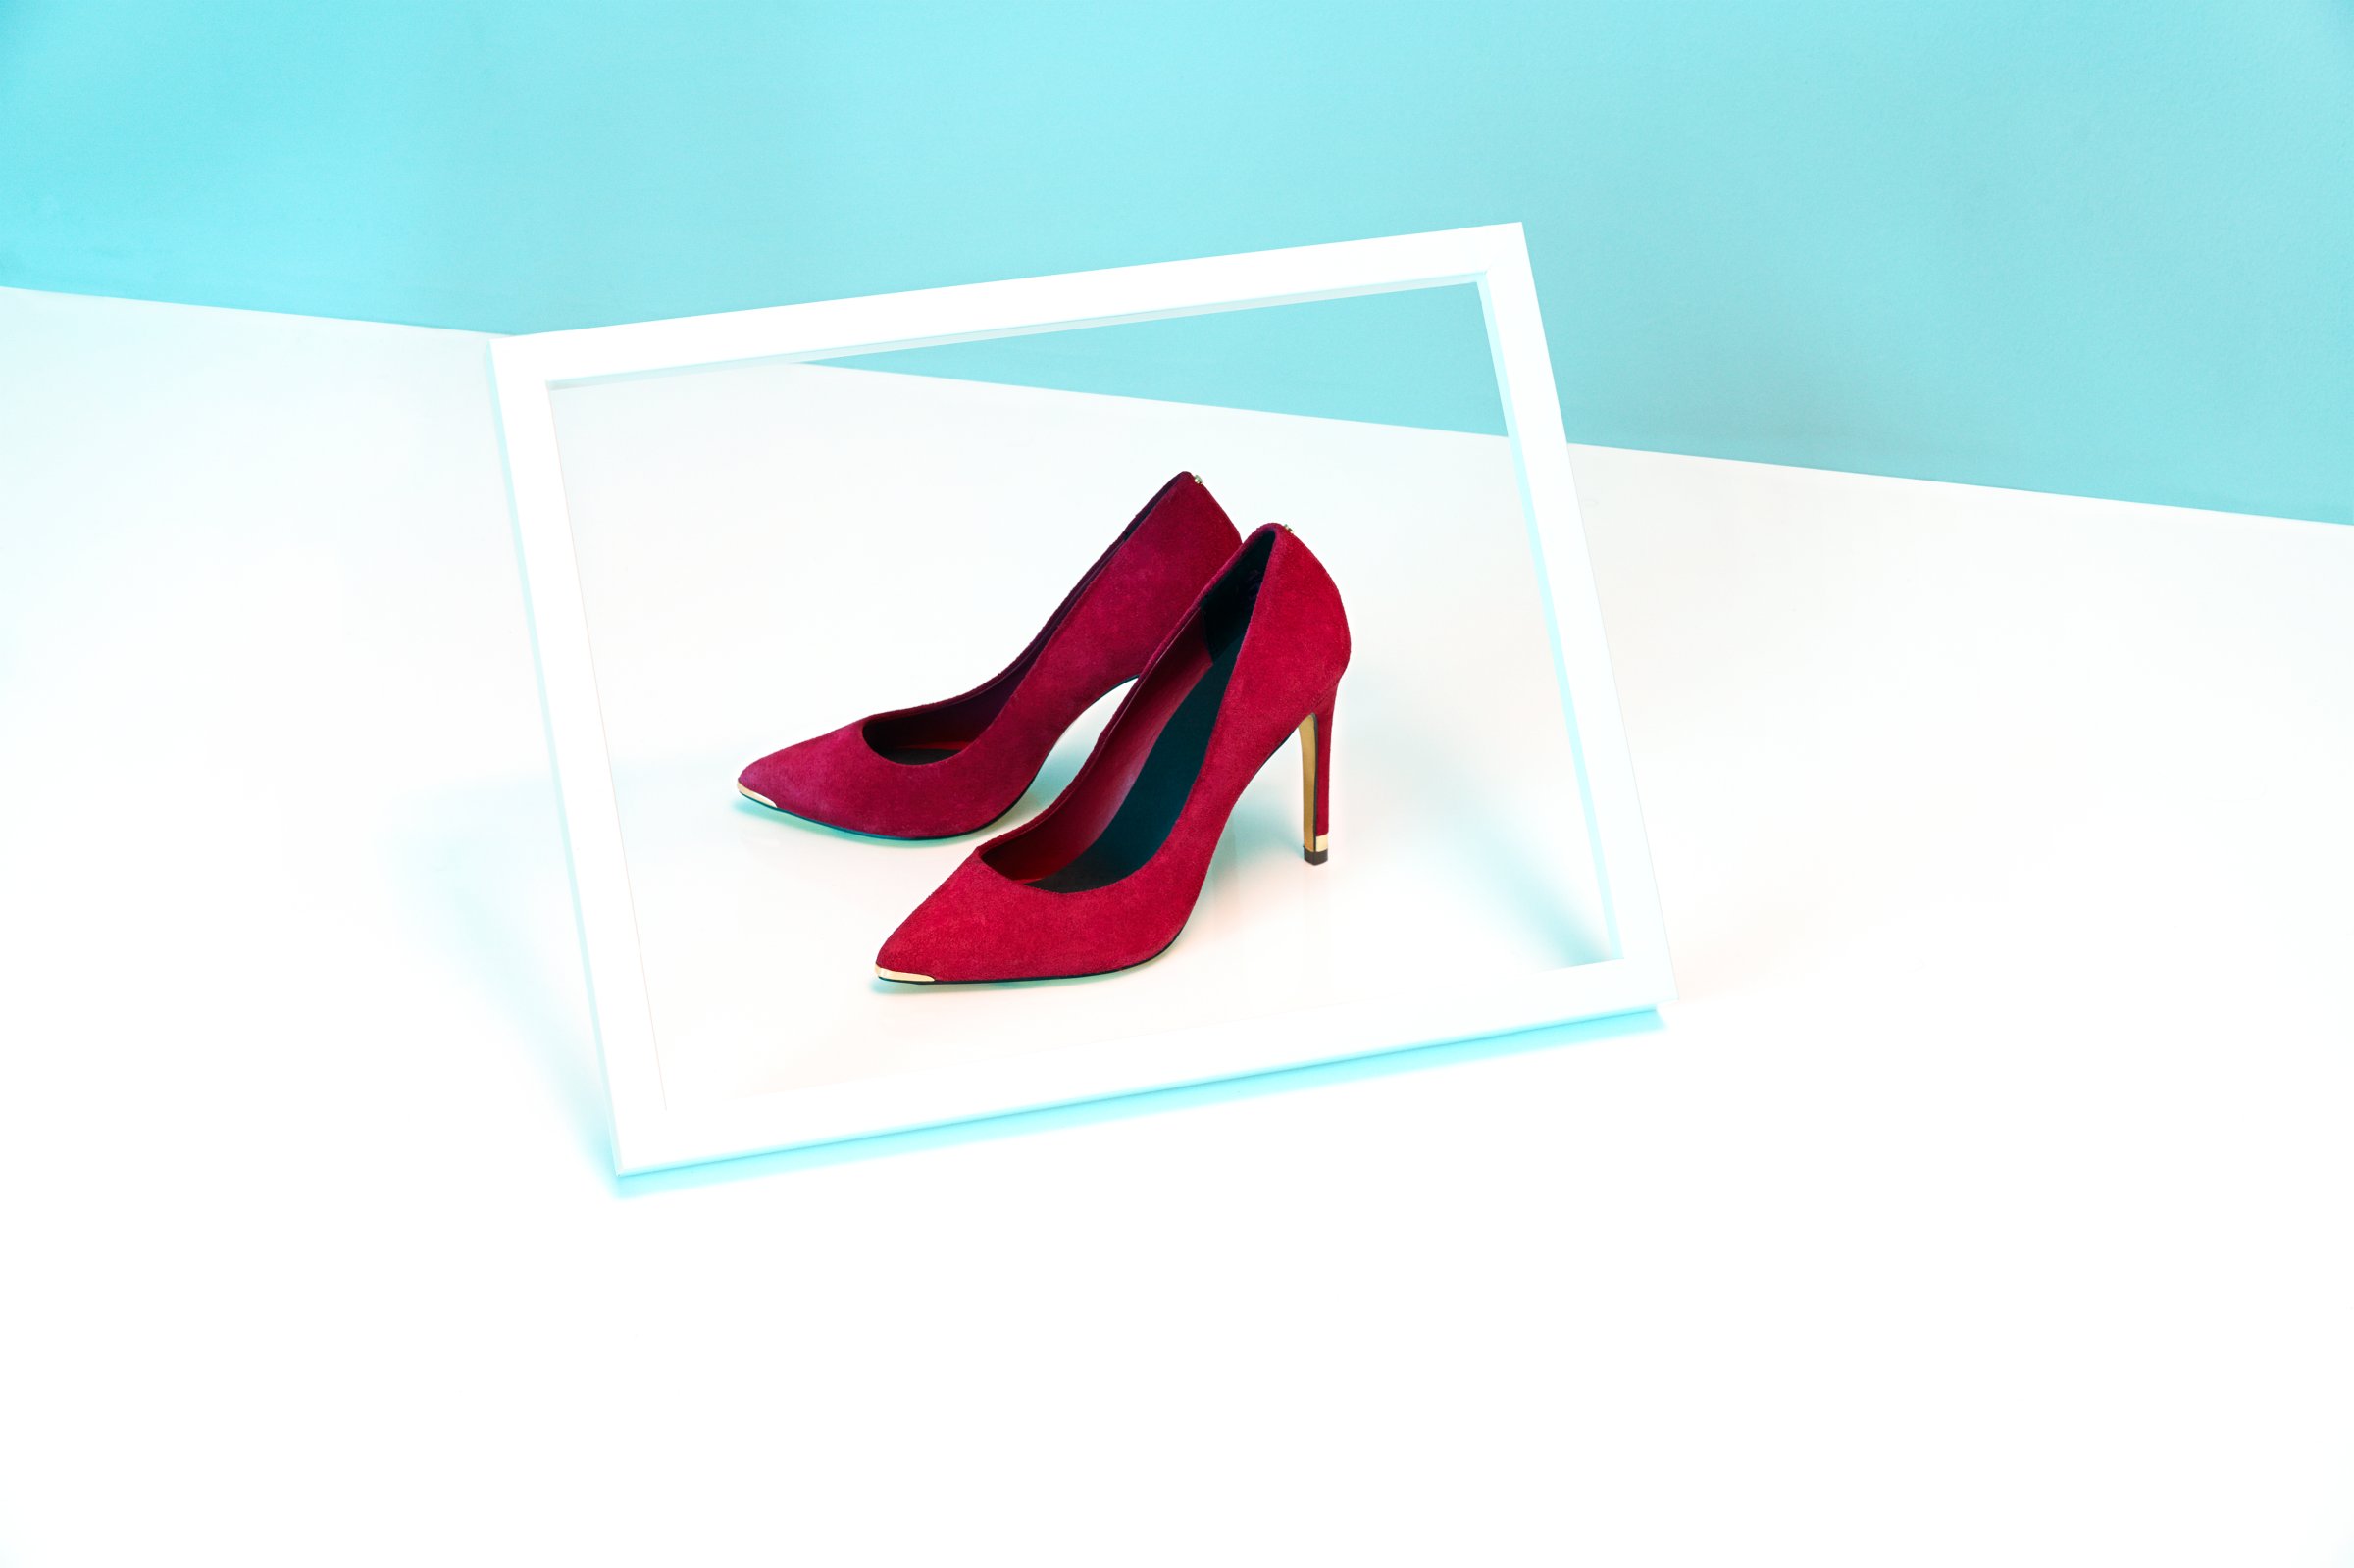 Pair of red high heeled shoes in a white frame